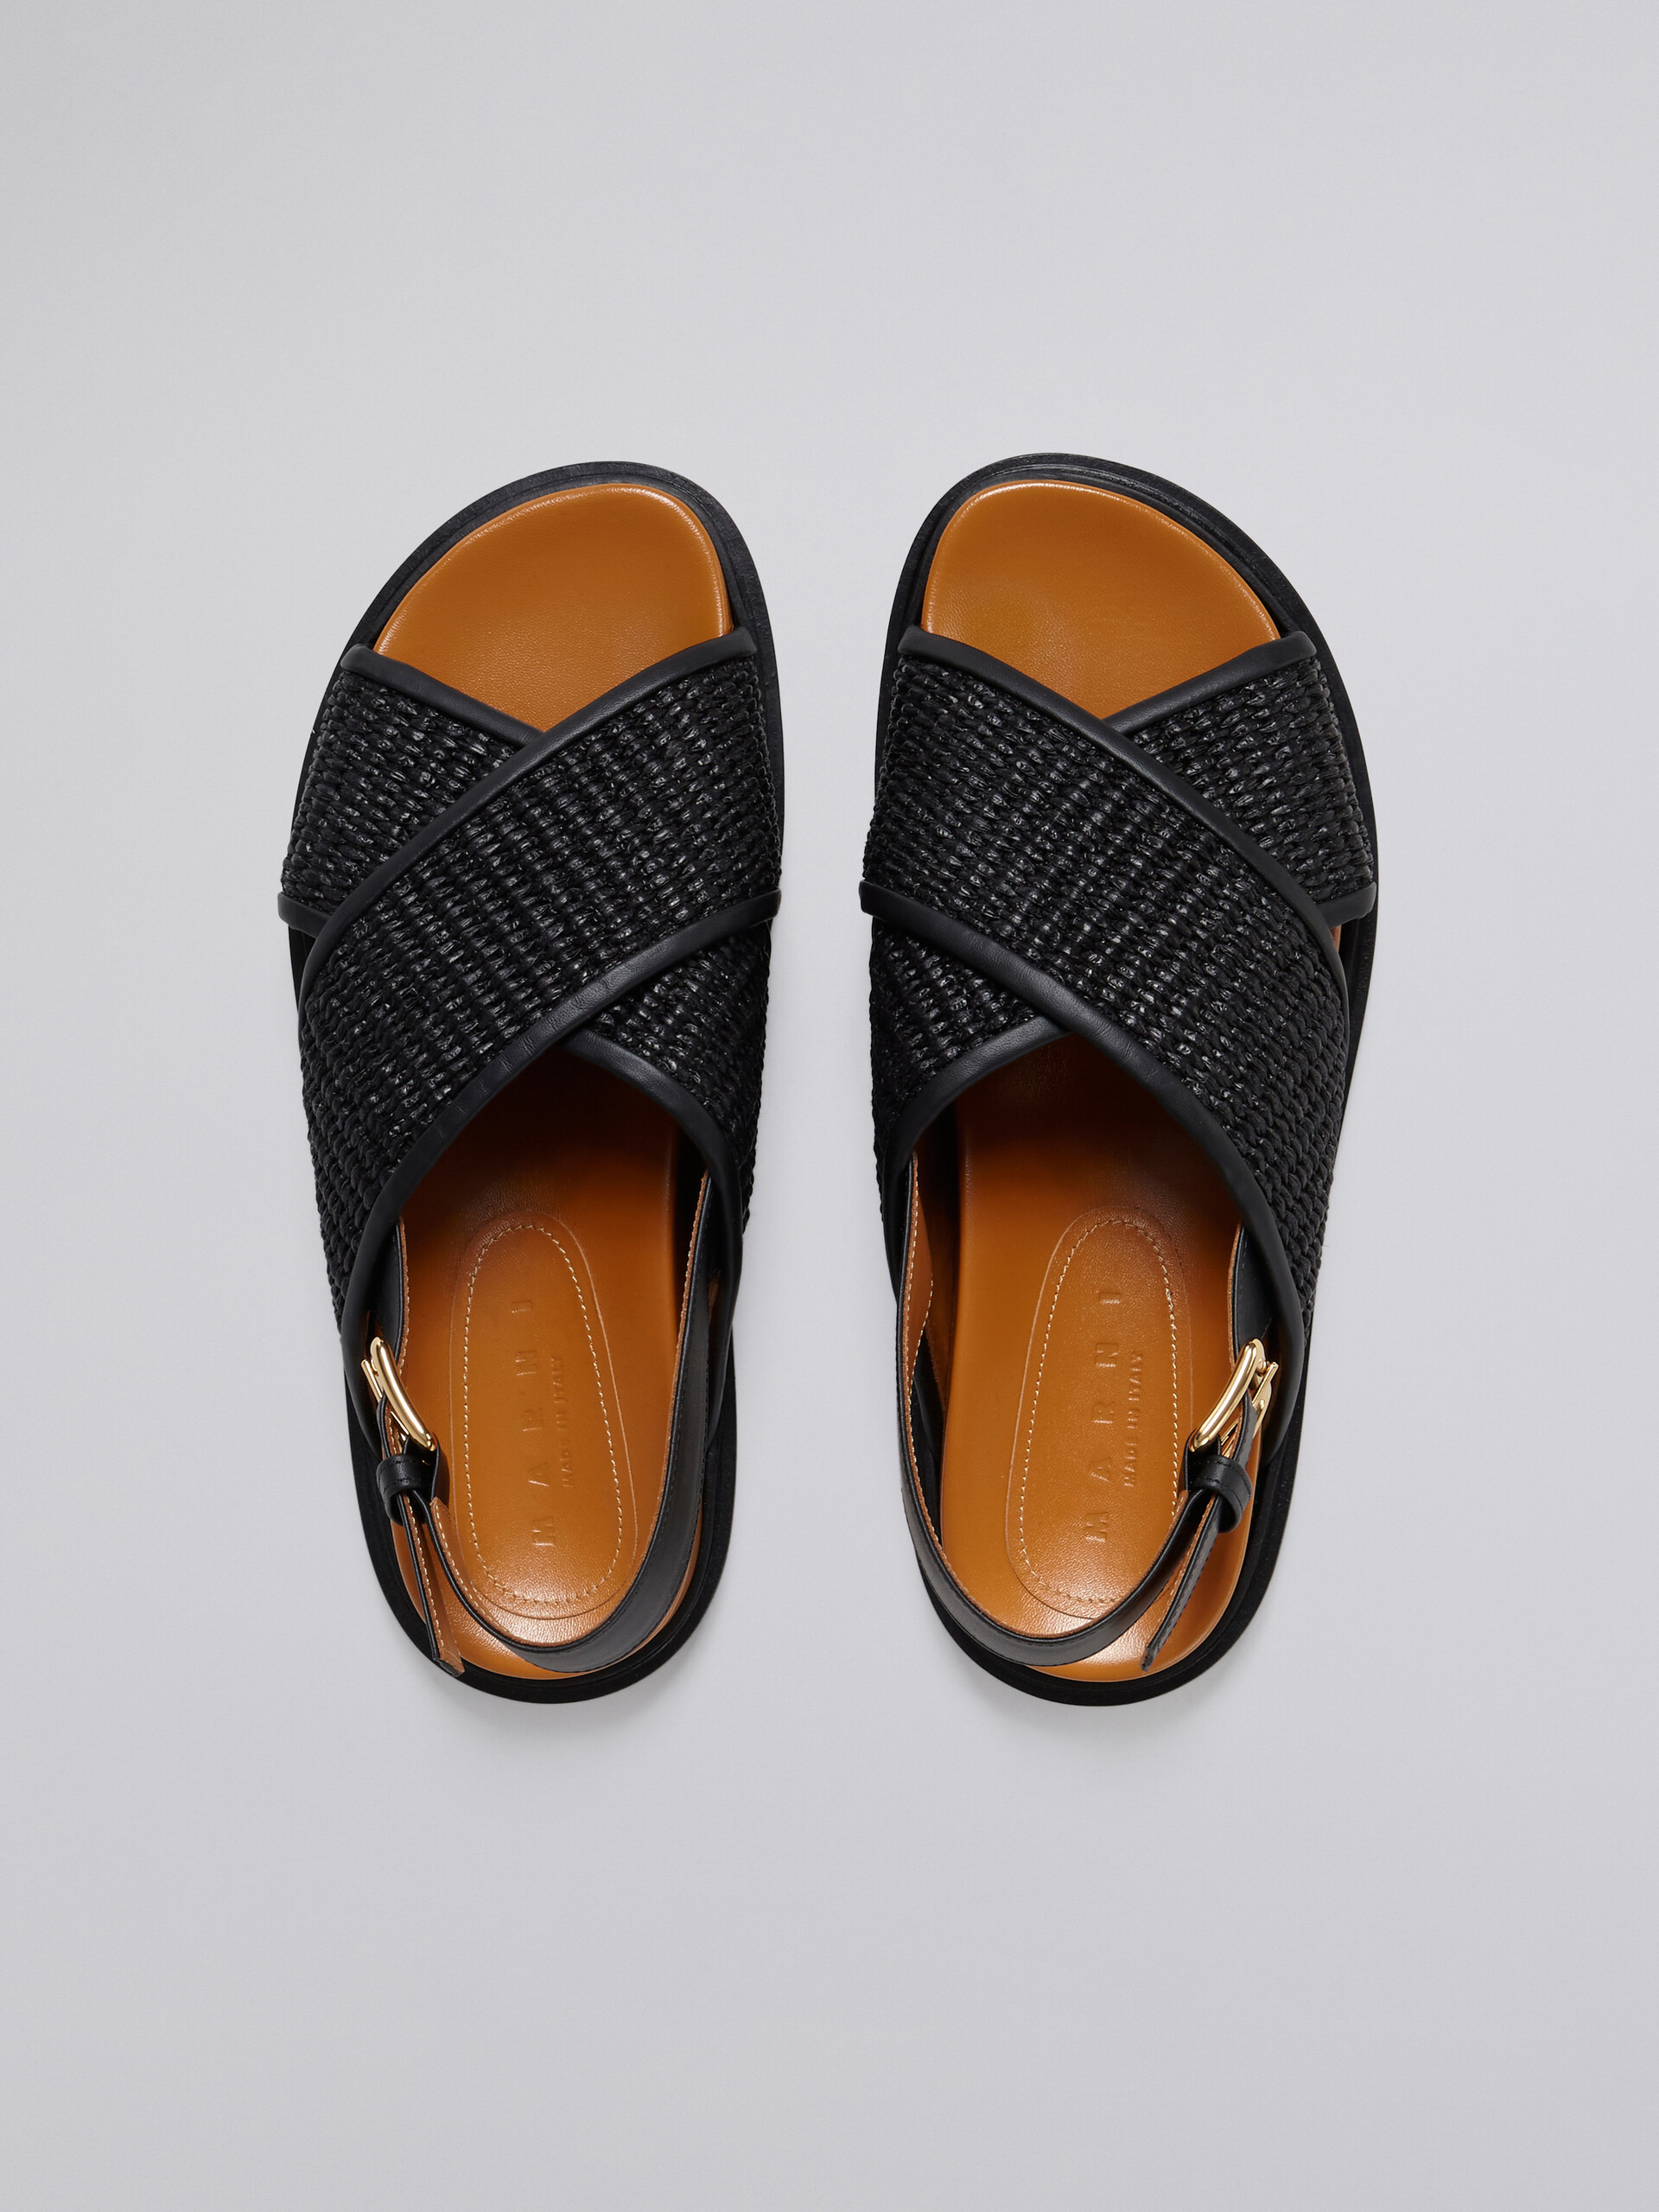 Fussbet sandals in brown leather and raffia-effect fabric - Sandals - Image 4